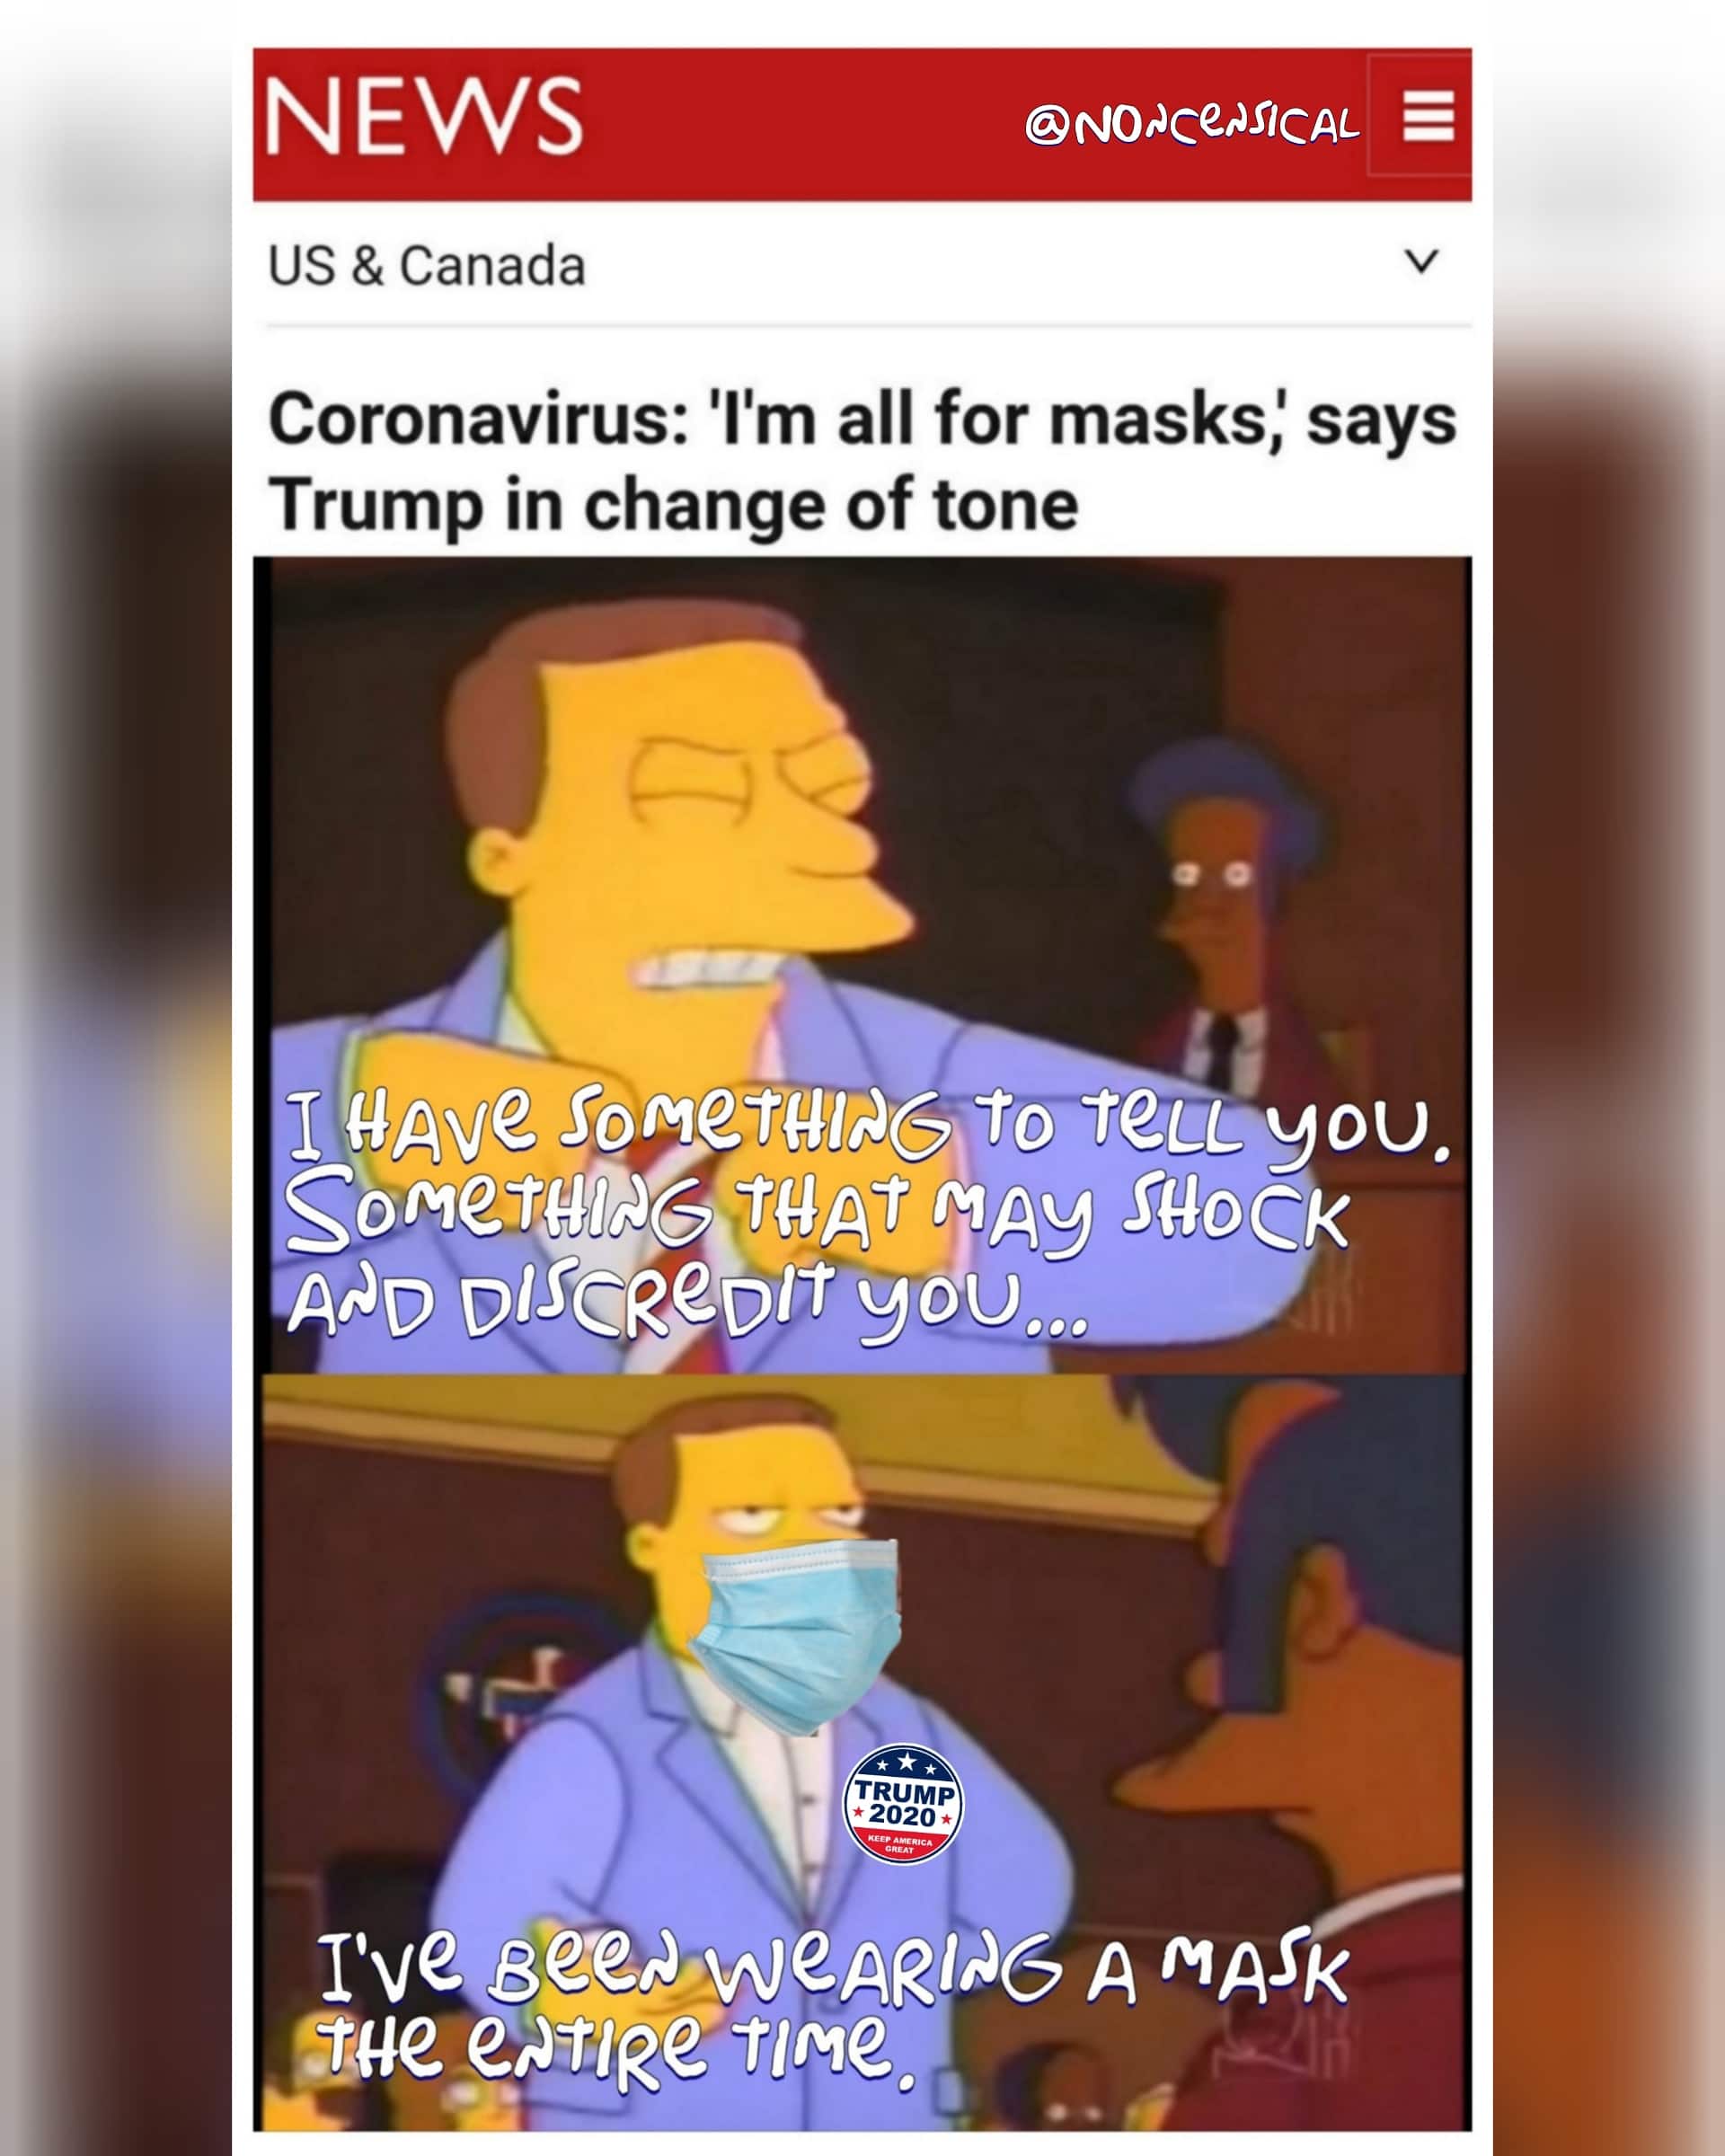 Political, Turns Political Memes Political, Turns text: NEWS US & Canada @NONCQSICAL = Coronavirus: 'I'm all for masks,' says Trump in change of tone 4Ave Teceyou. AND DIS*Dlt you... TRUMP * 2020 KEEP AMERICA GREAT TveSge,weARlN6 A age 